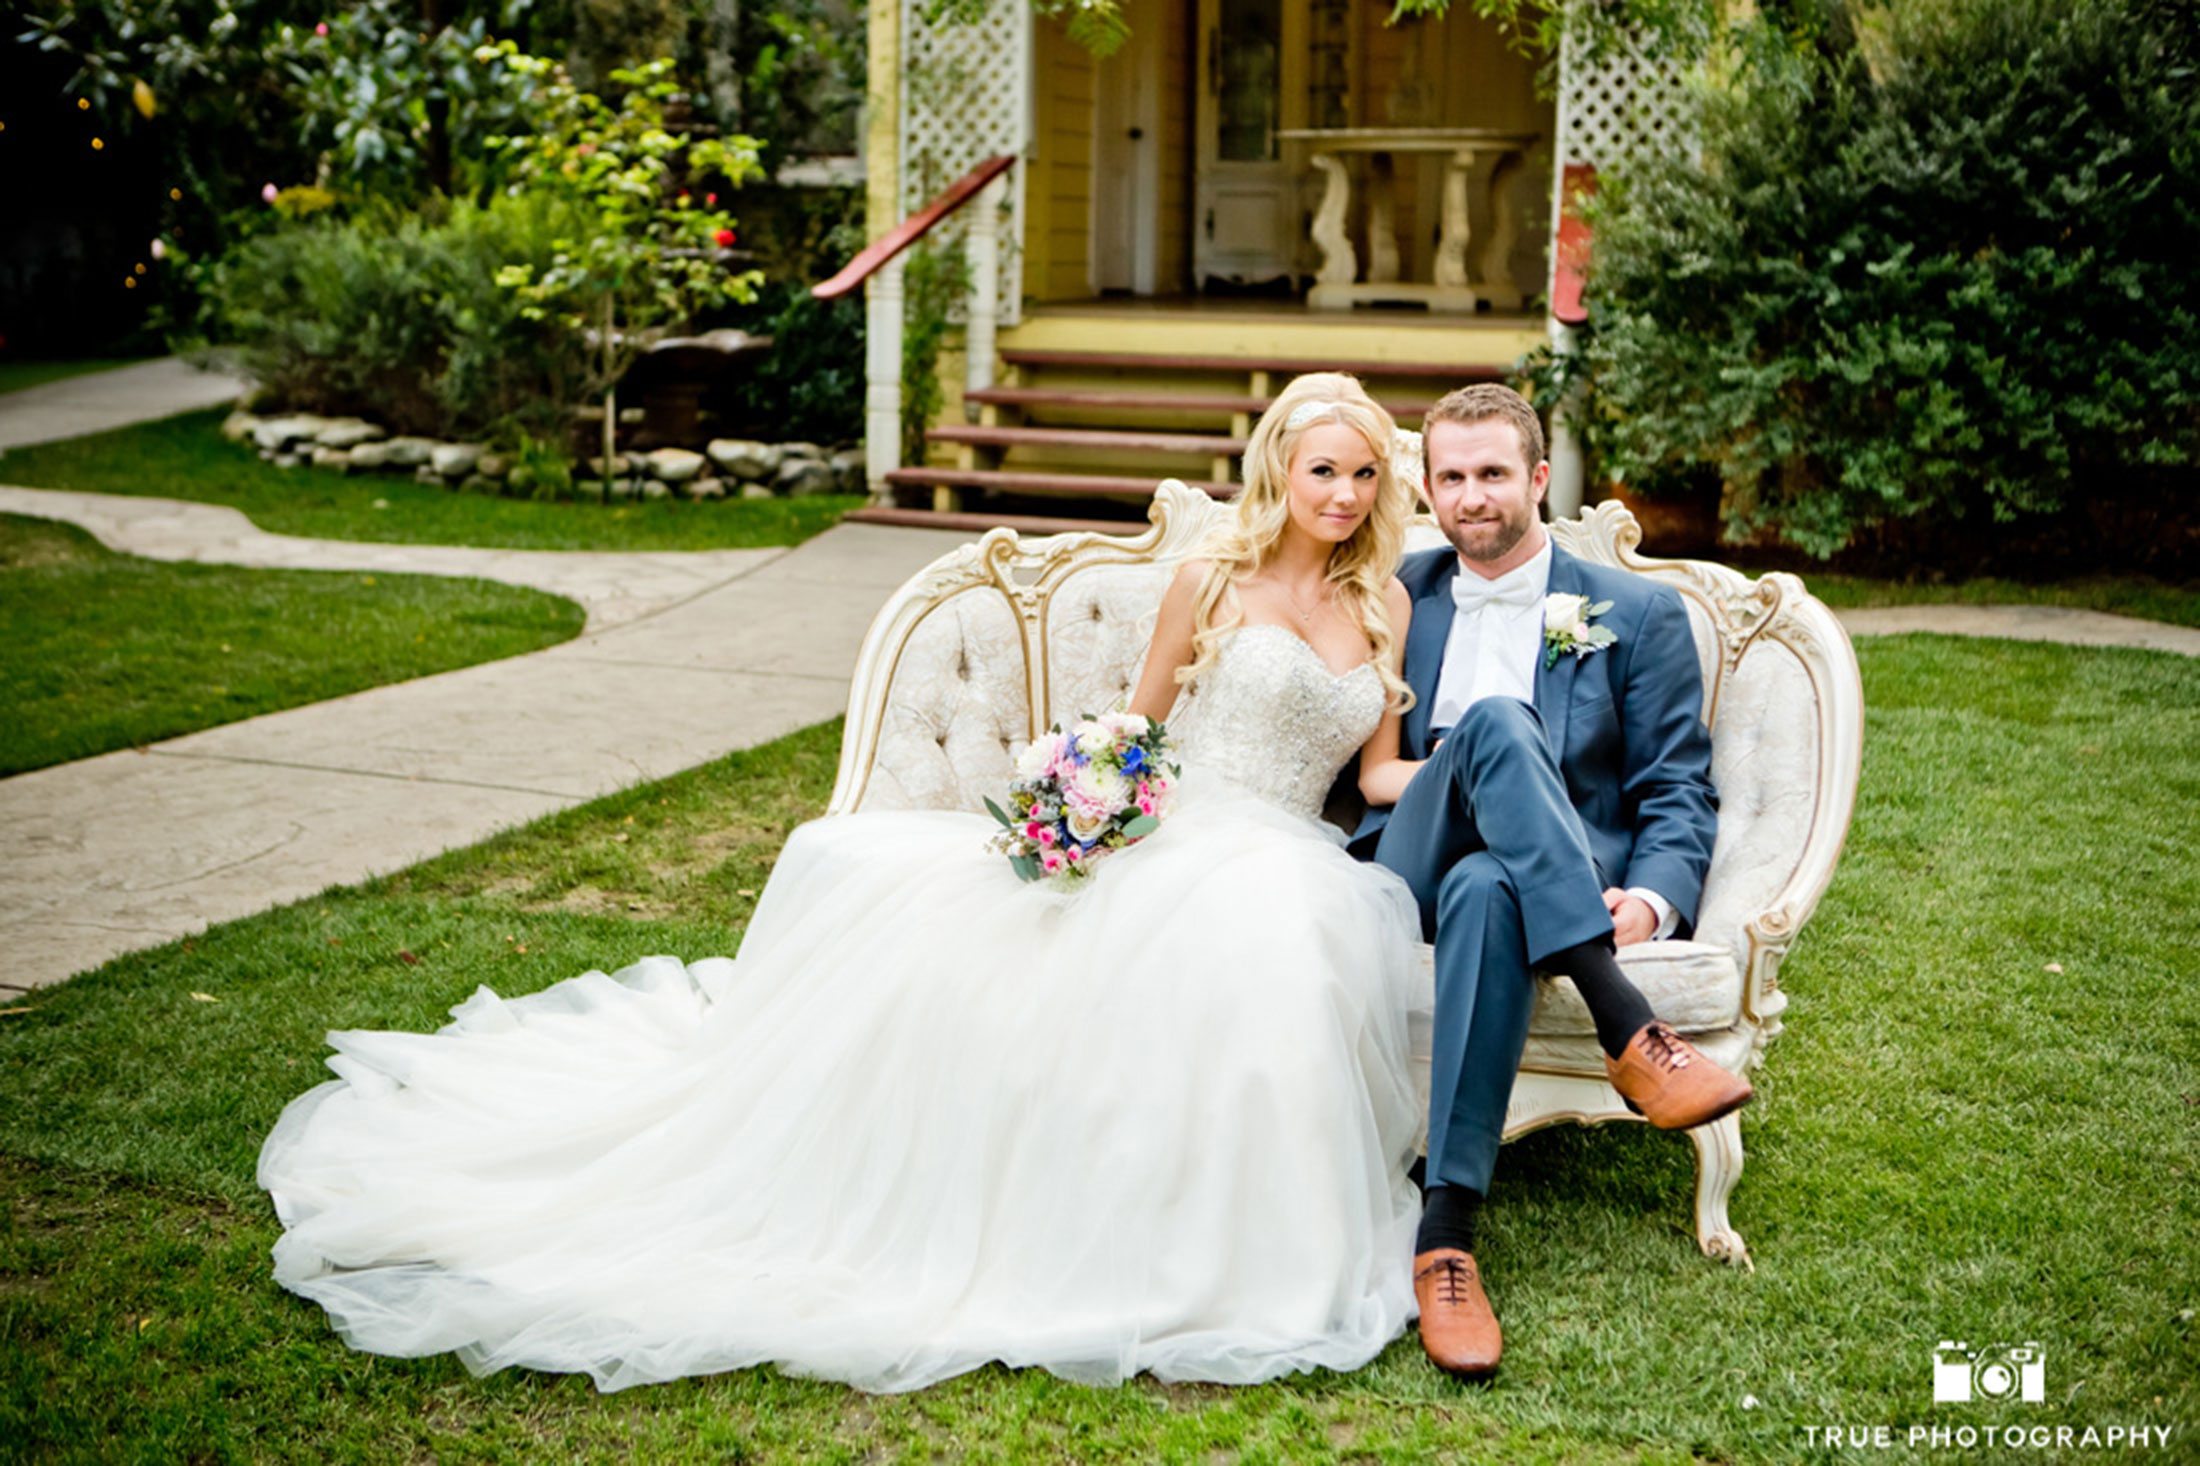 Bride and groom with style and vintage furniture